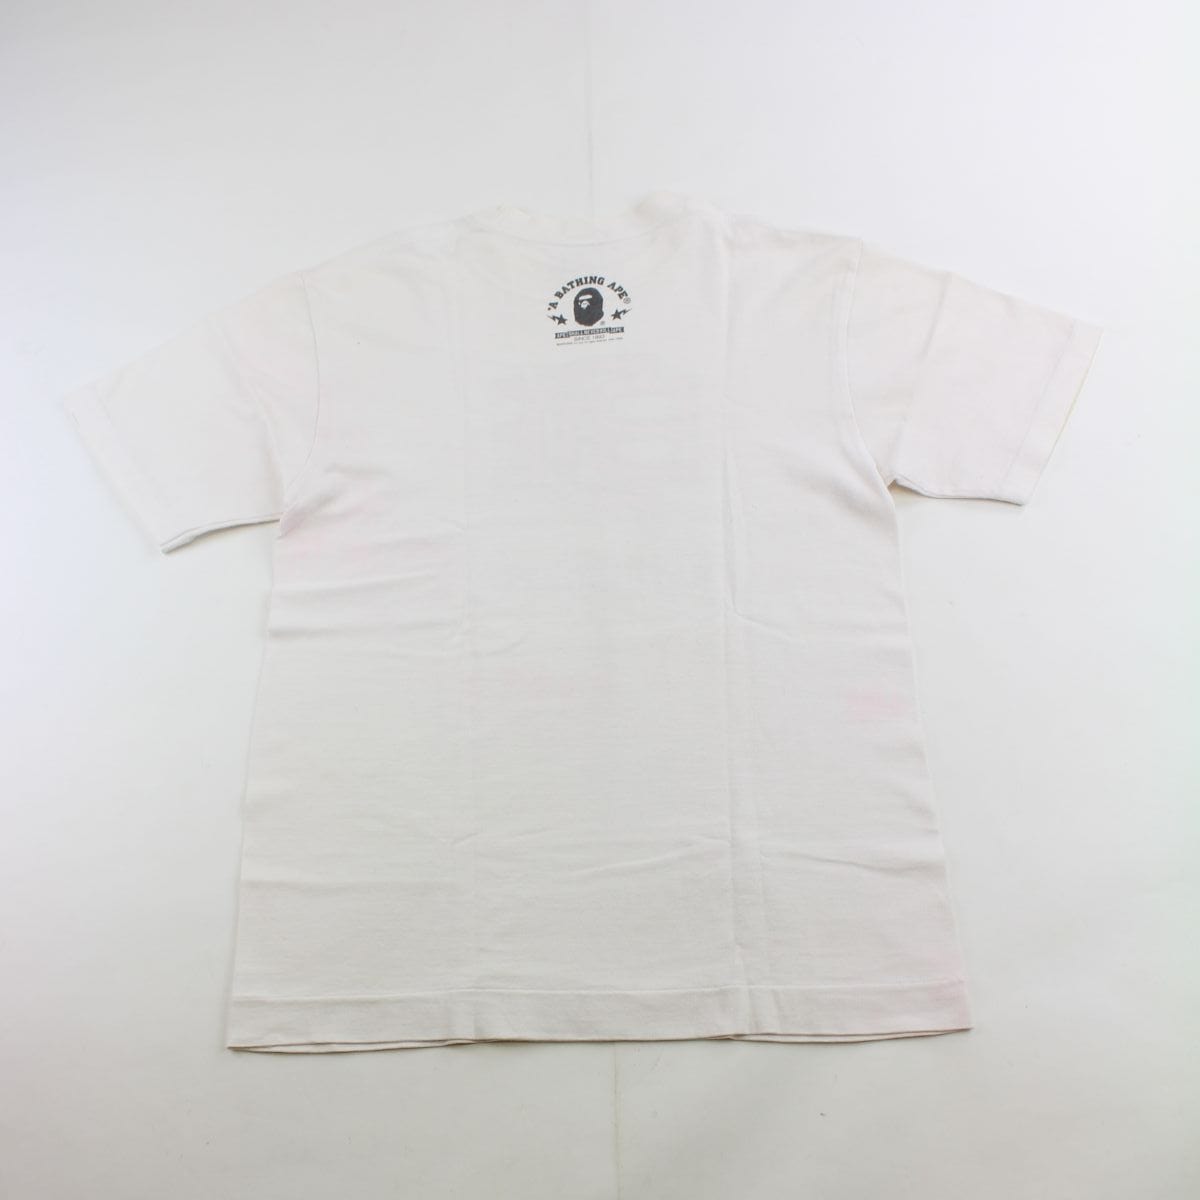 bape pink text tee white - SaruGeneral